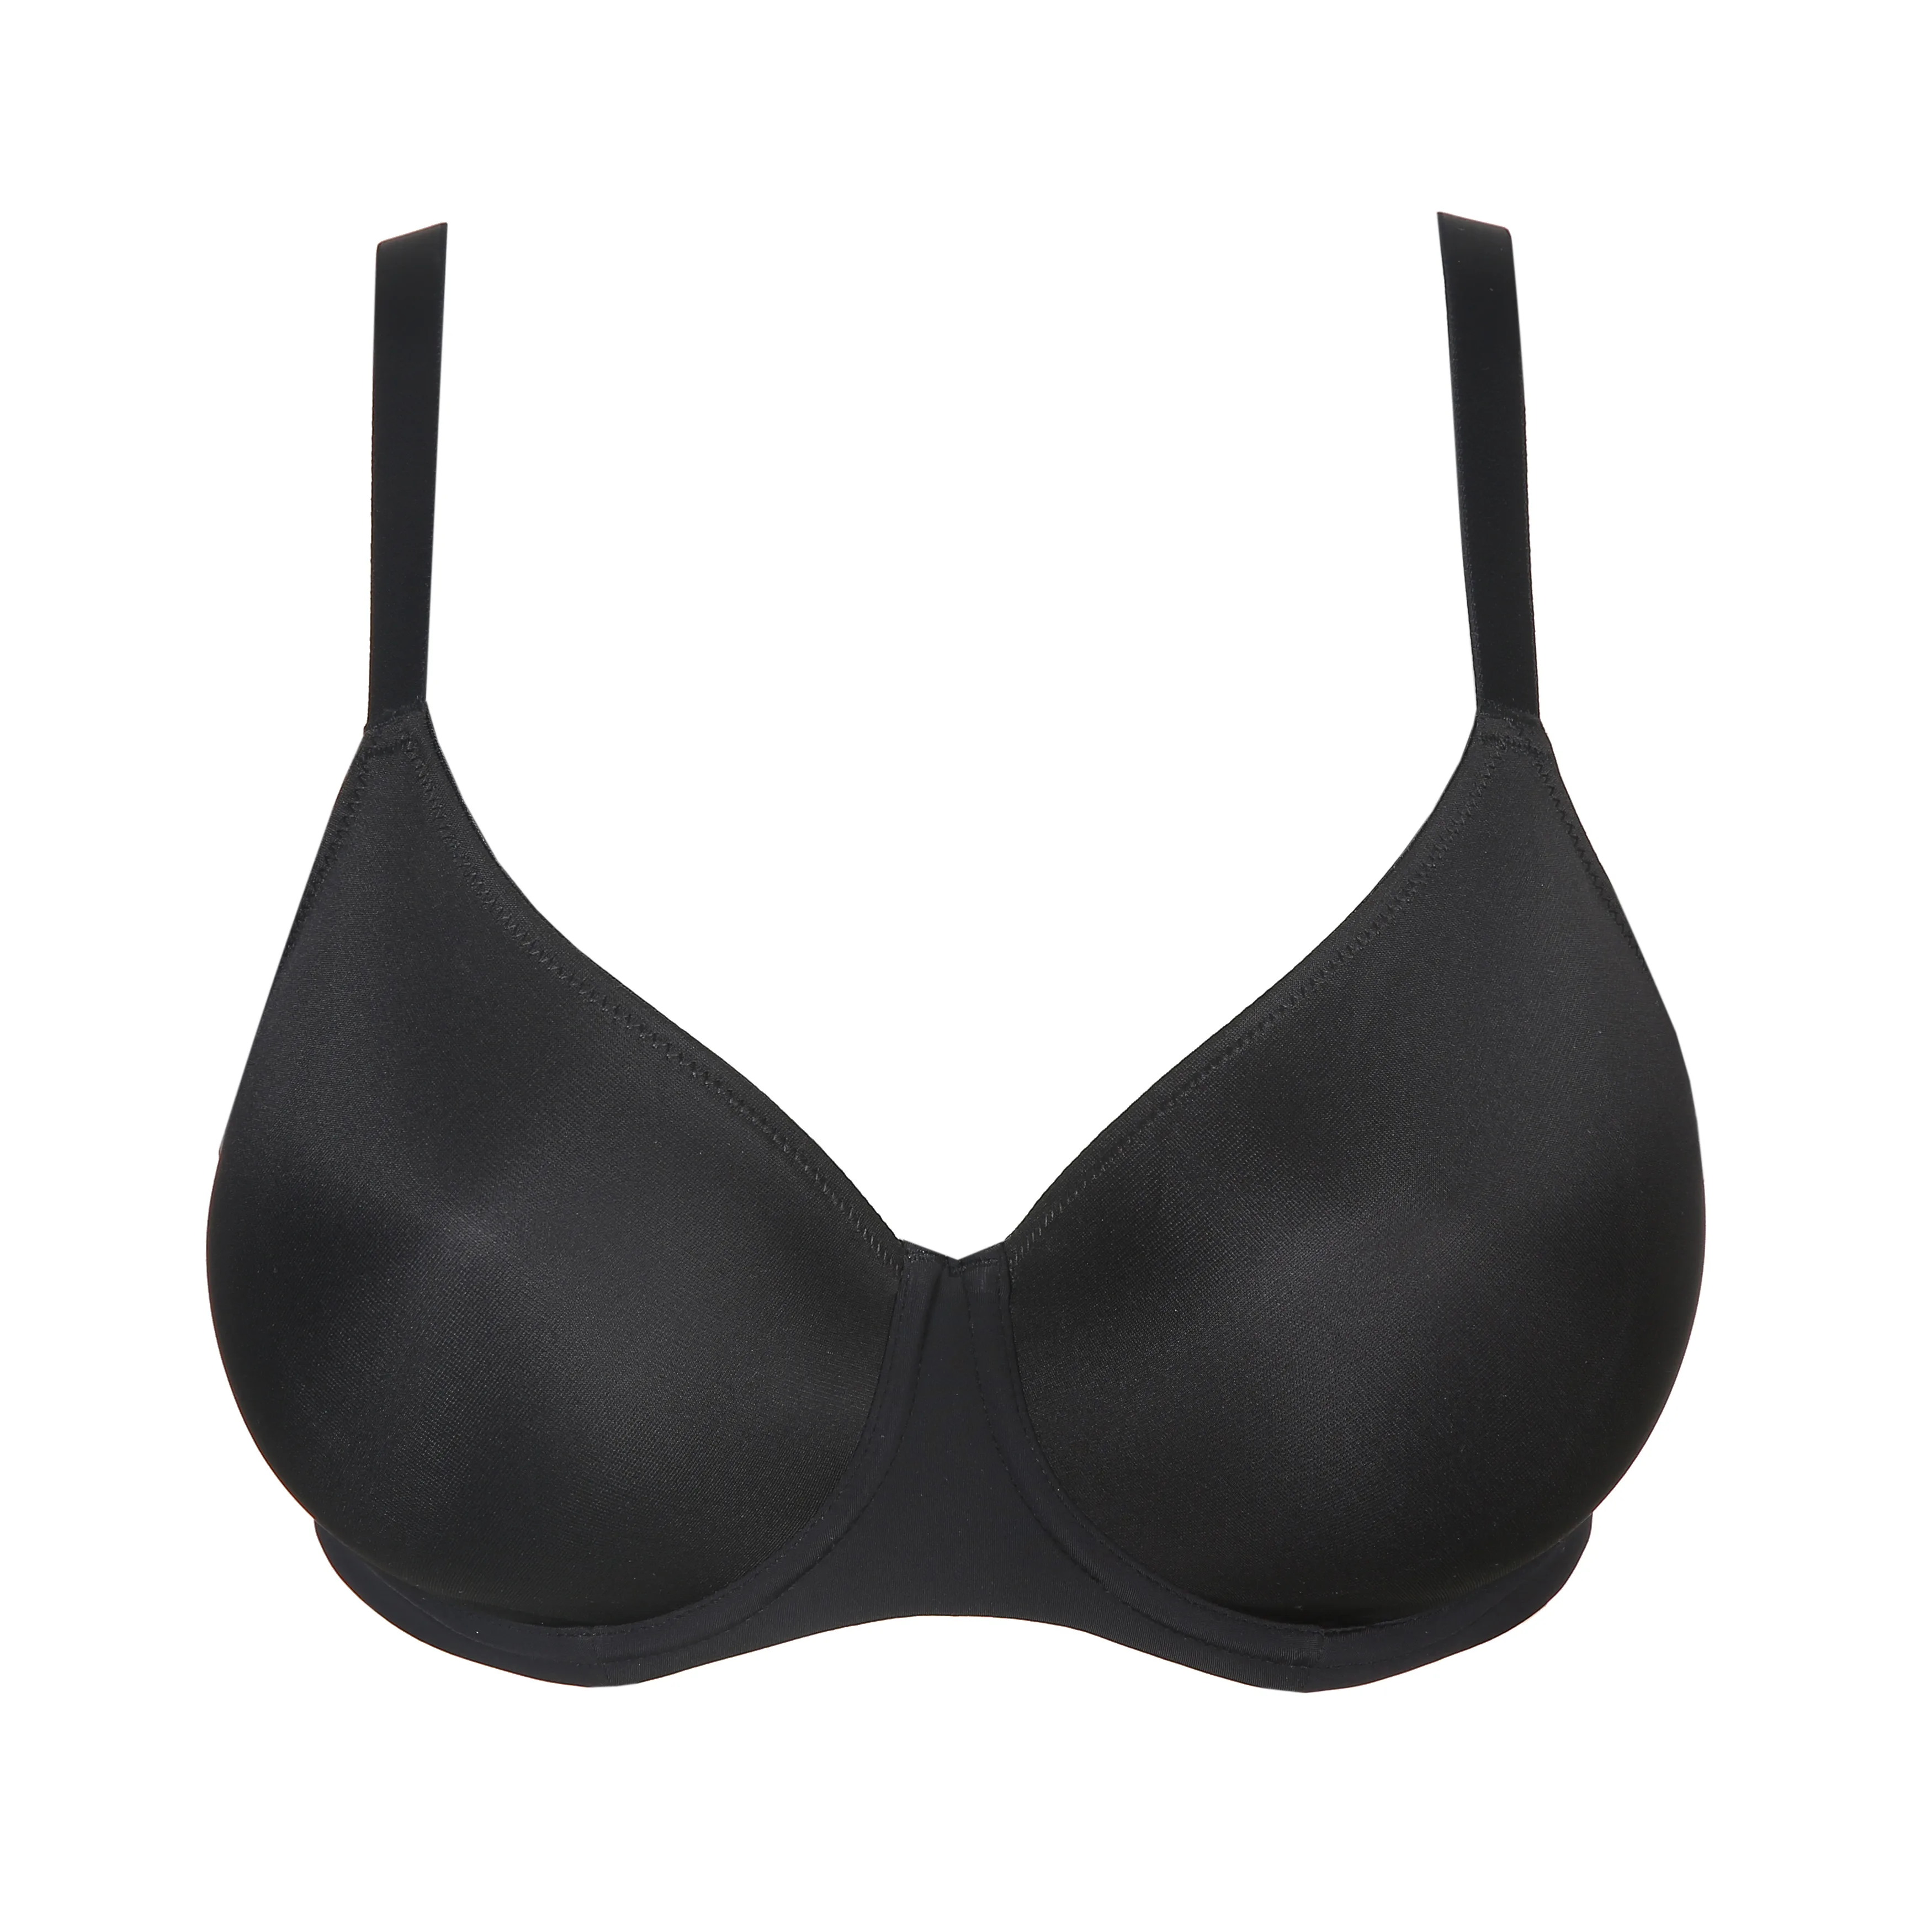 PrimaDonna Figuras Charcoal Non Padded Full Cup Seamless